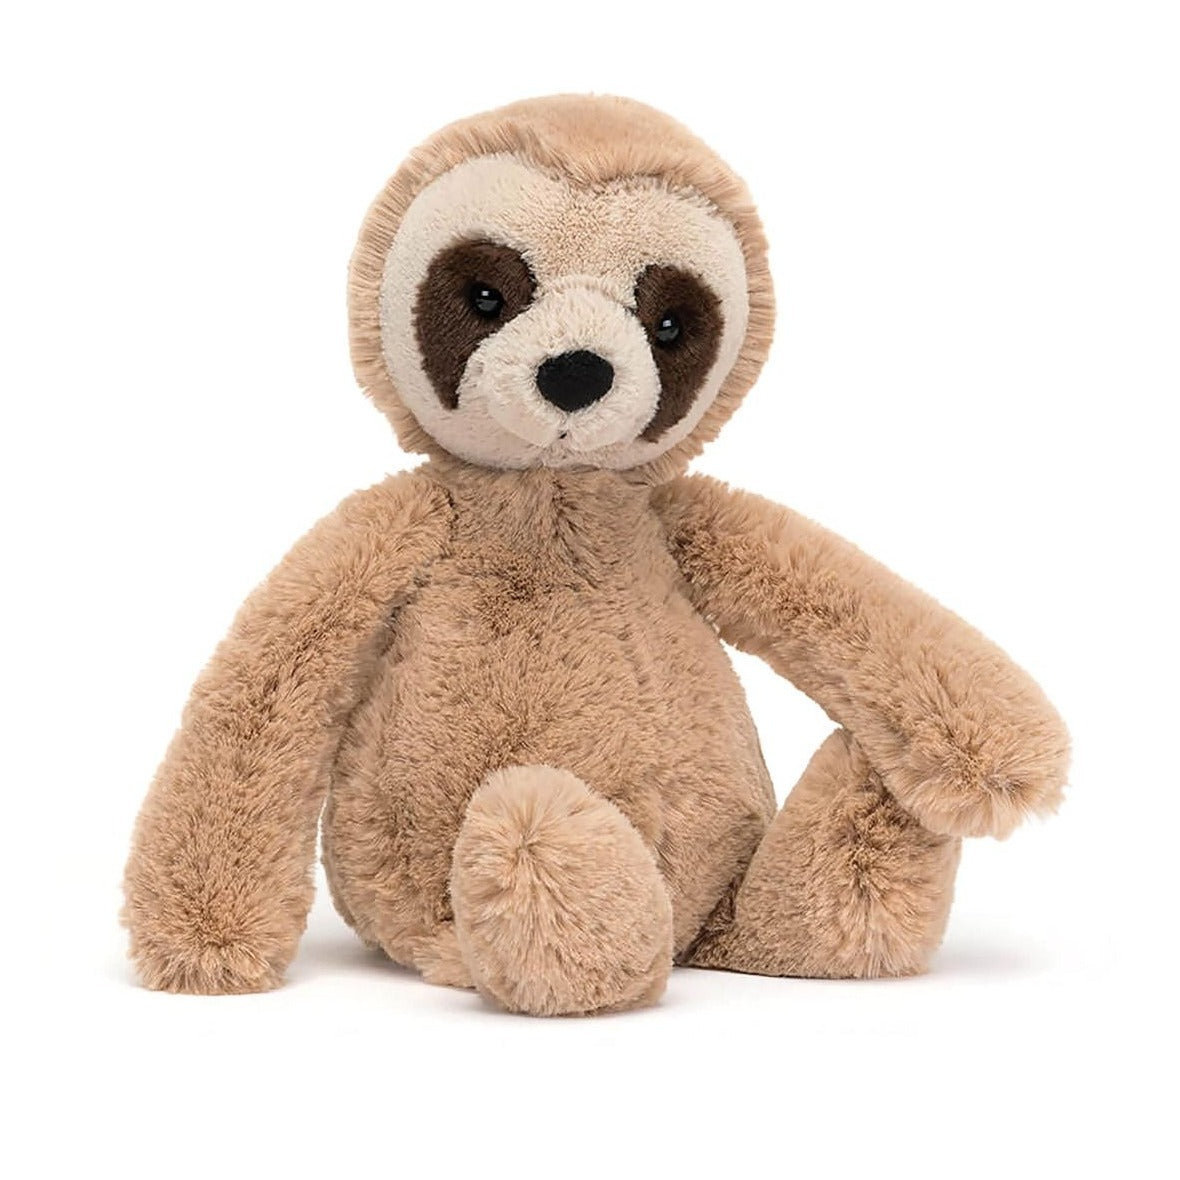 Jellycat sloth - angus and dudley